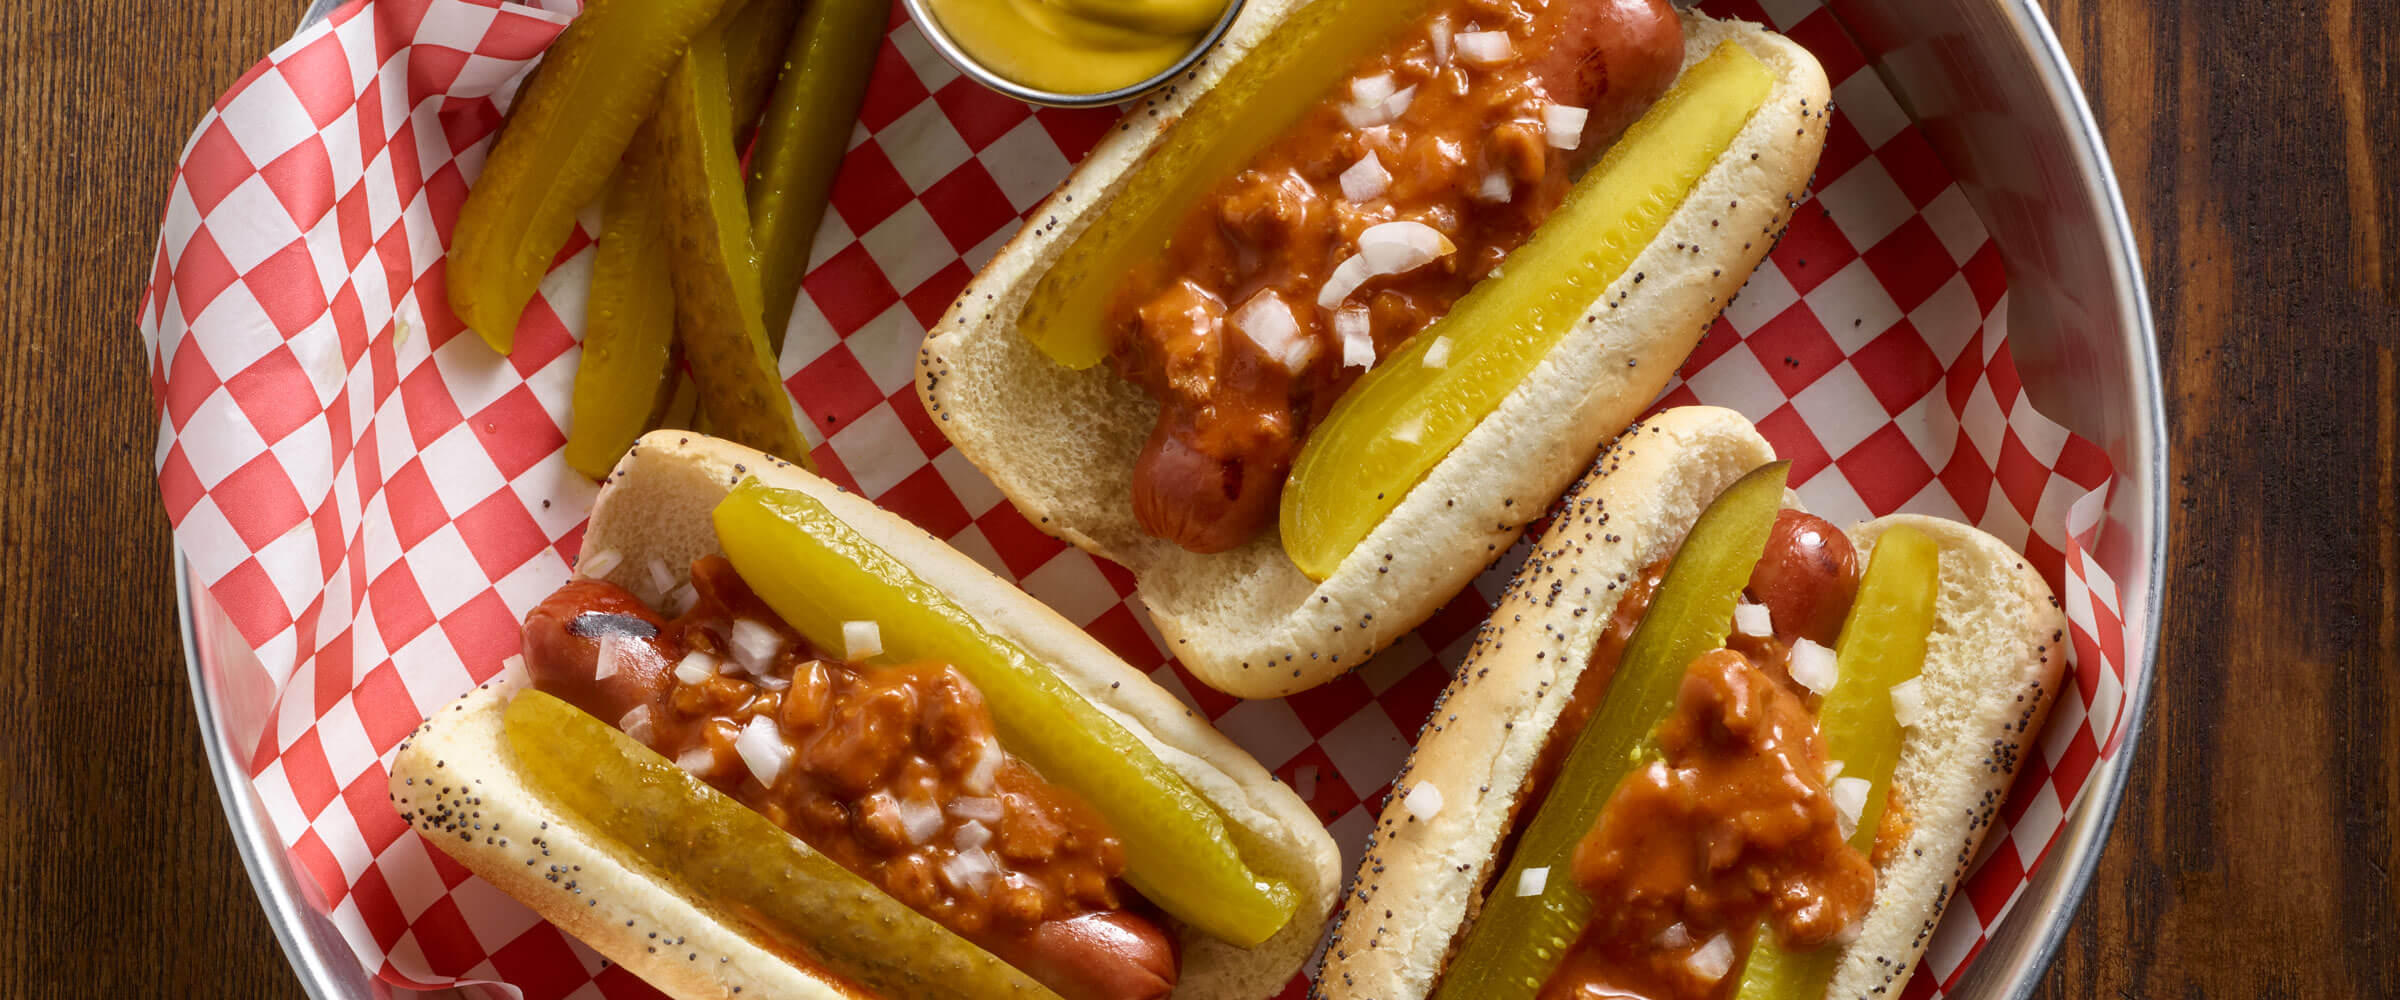 Chili Dilly Dogs topped with pickle slices and onion on red and white checked paper